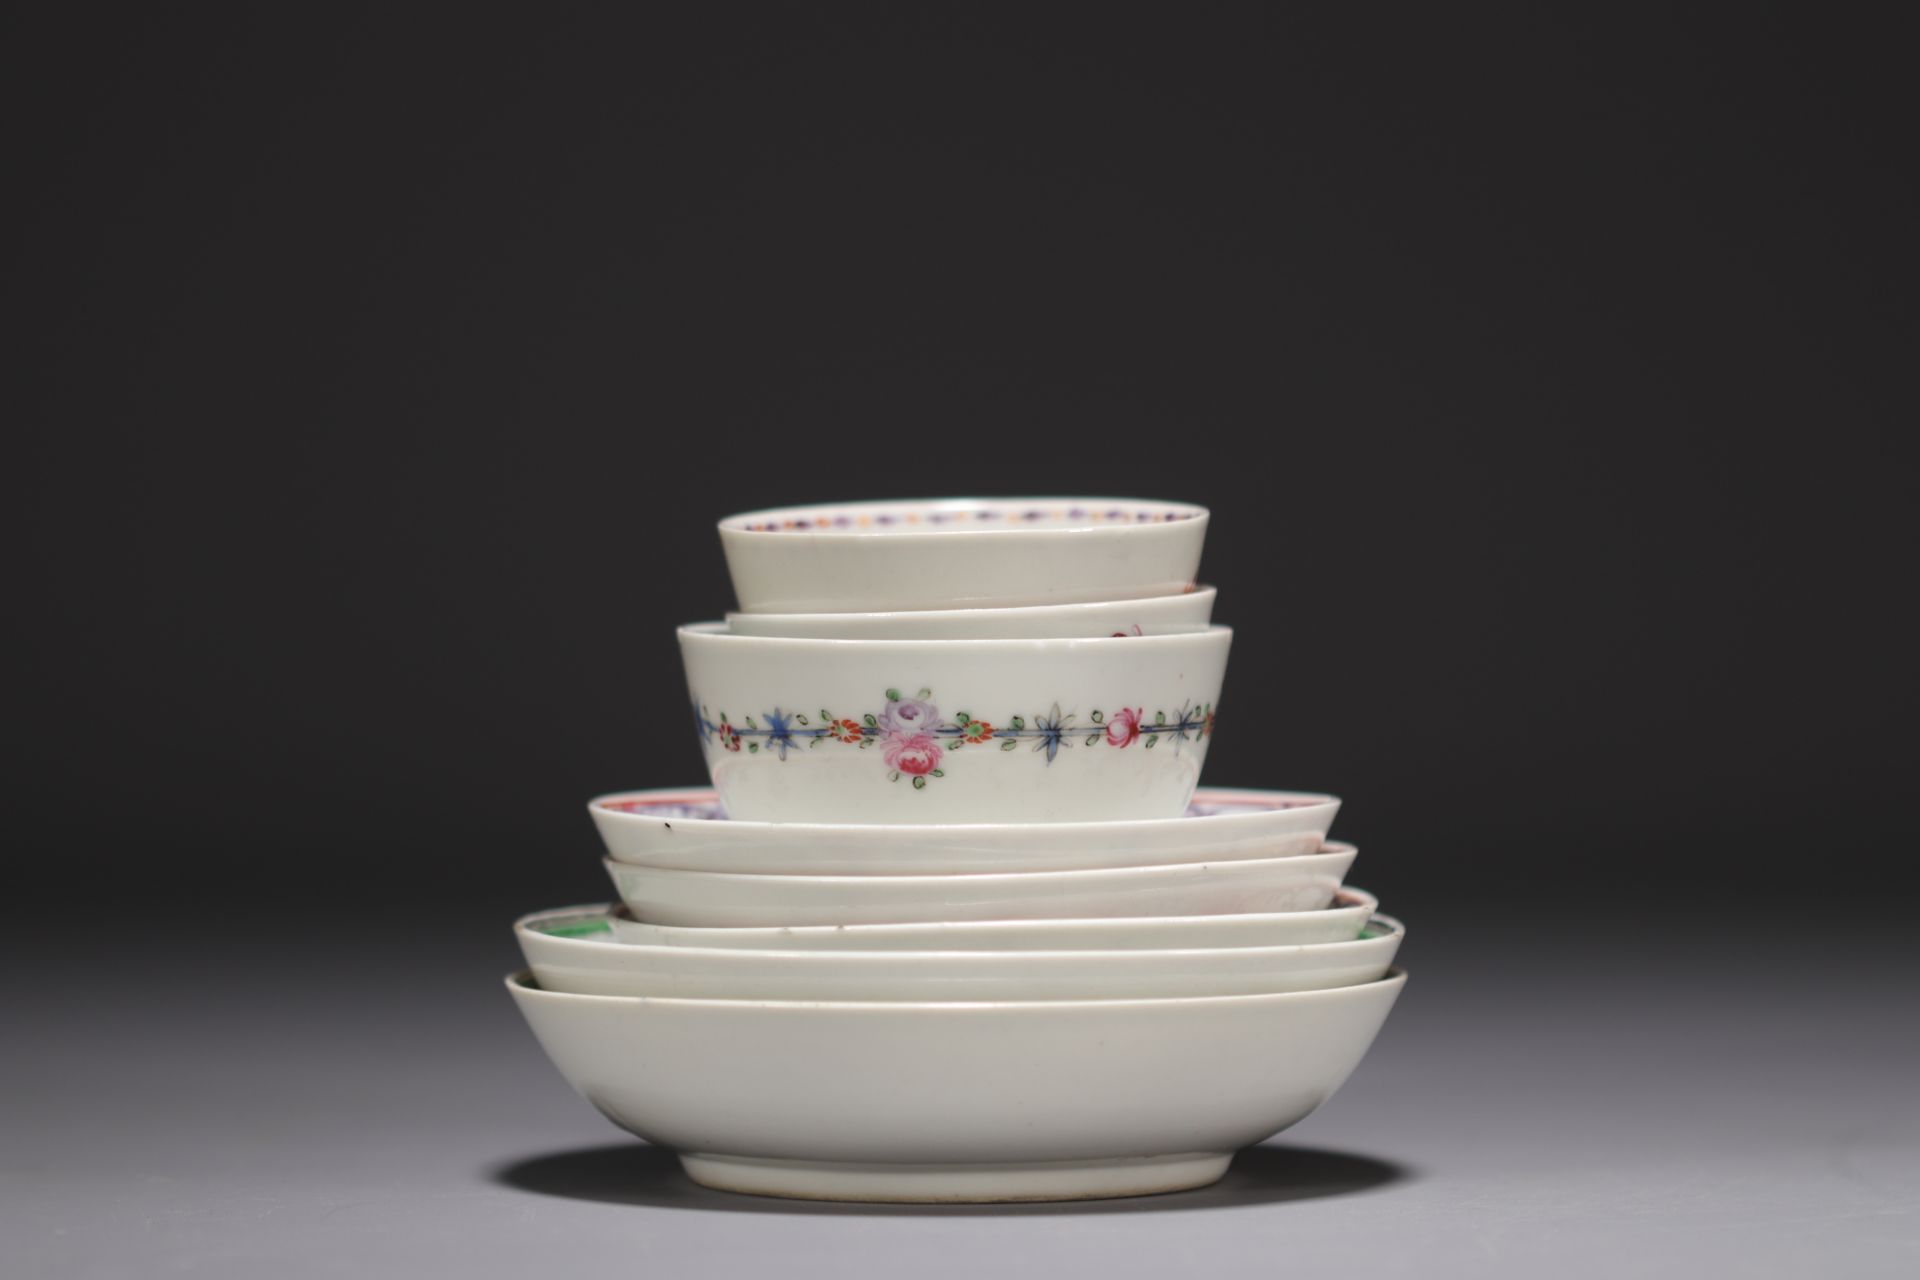 China - Set of Famille Rose porcelain bowls and saucers. - Image 3 of 3